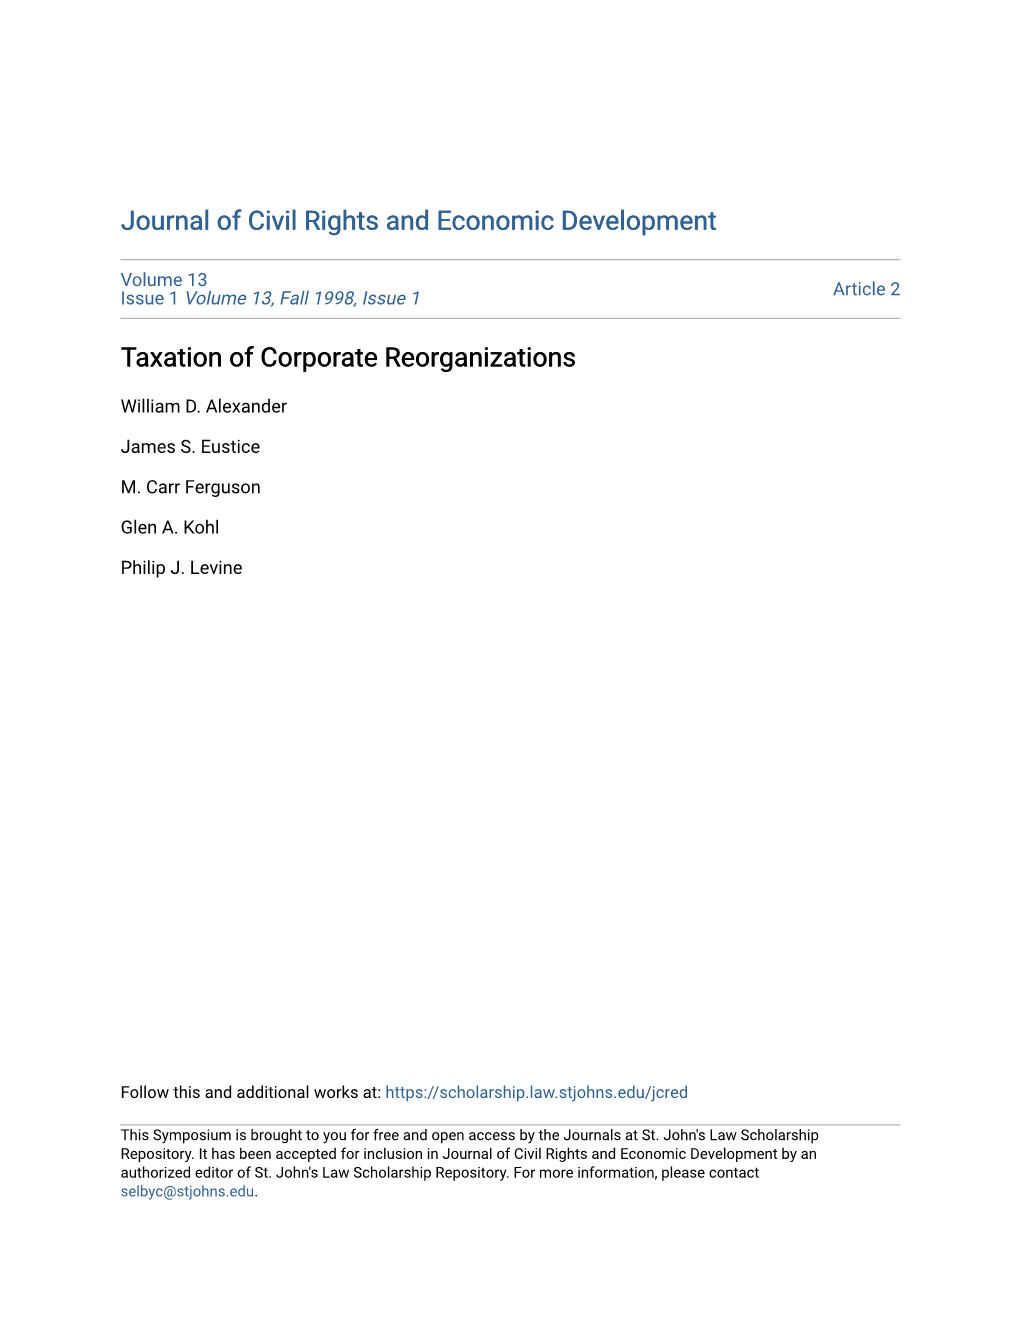 Taxation of Corporate Reorganizations